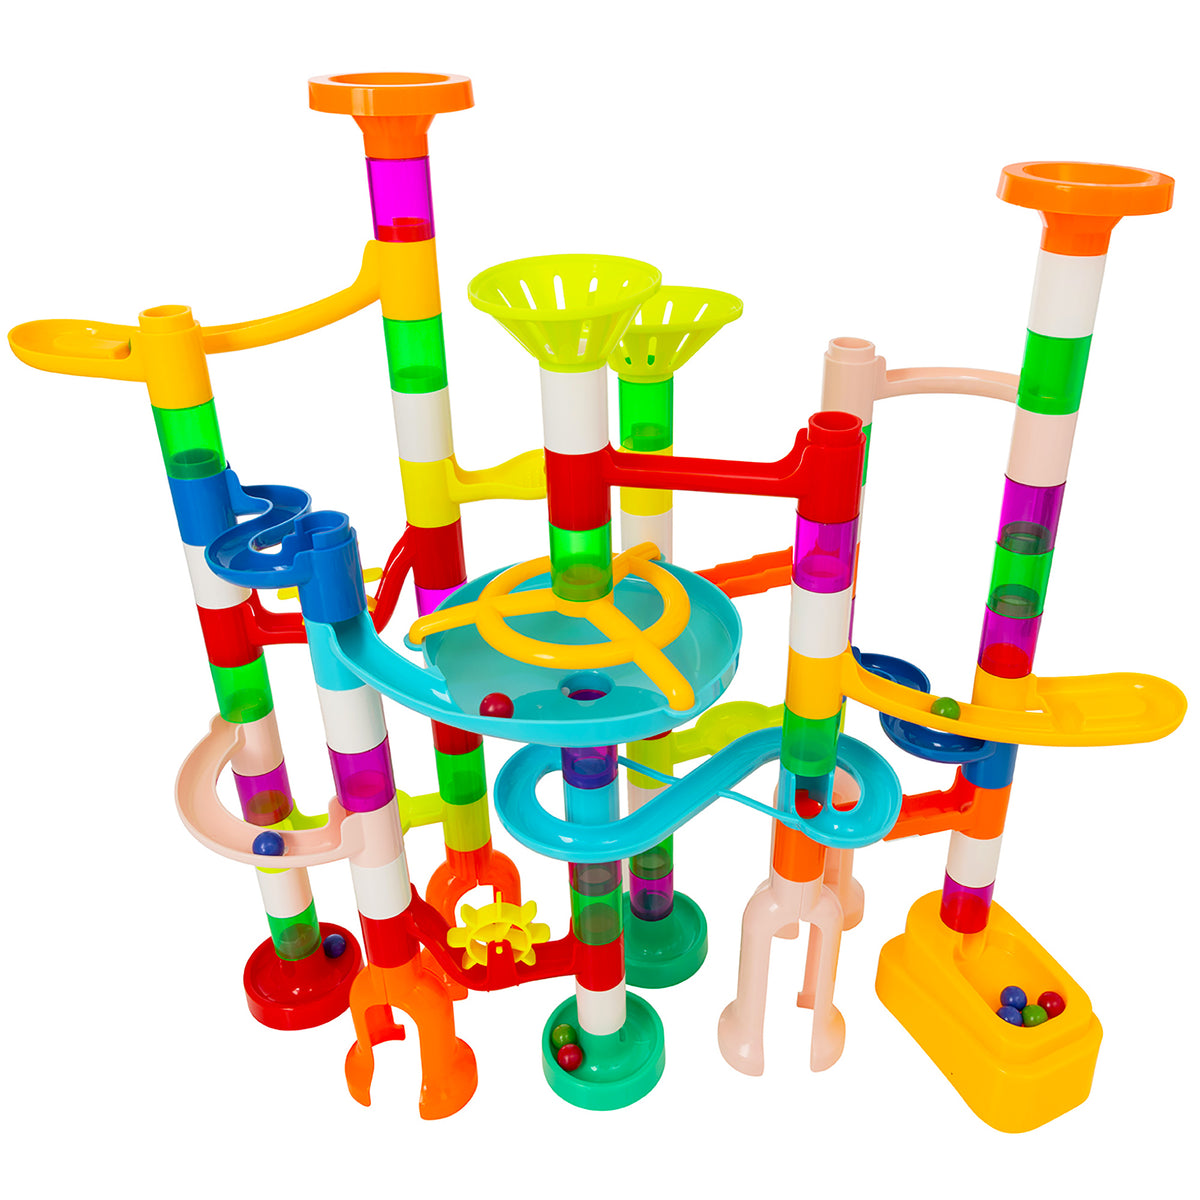  image of 100+ piece Marble Run from HTI